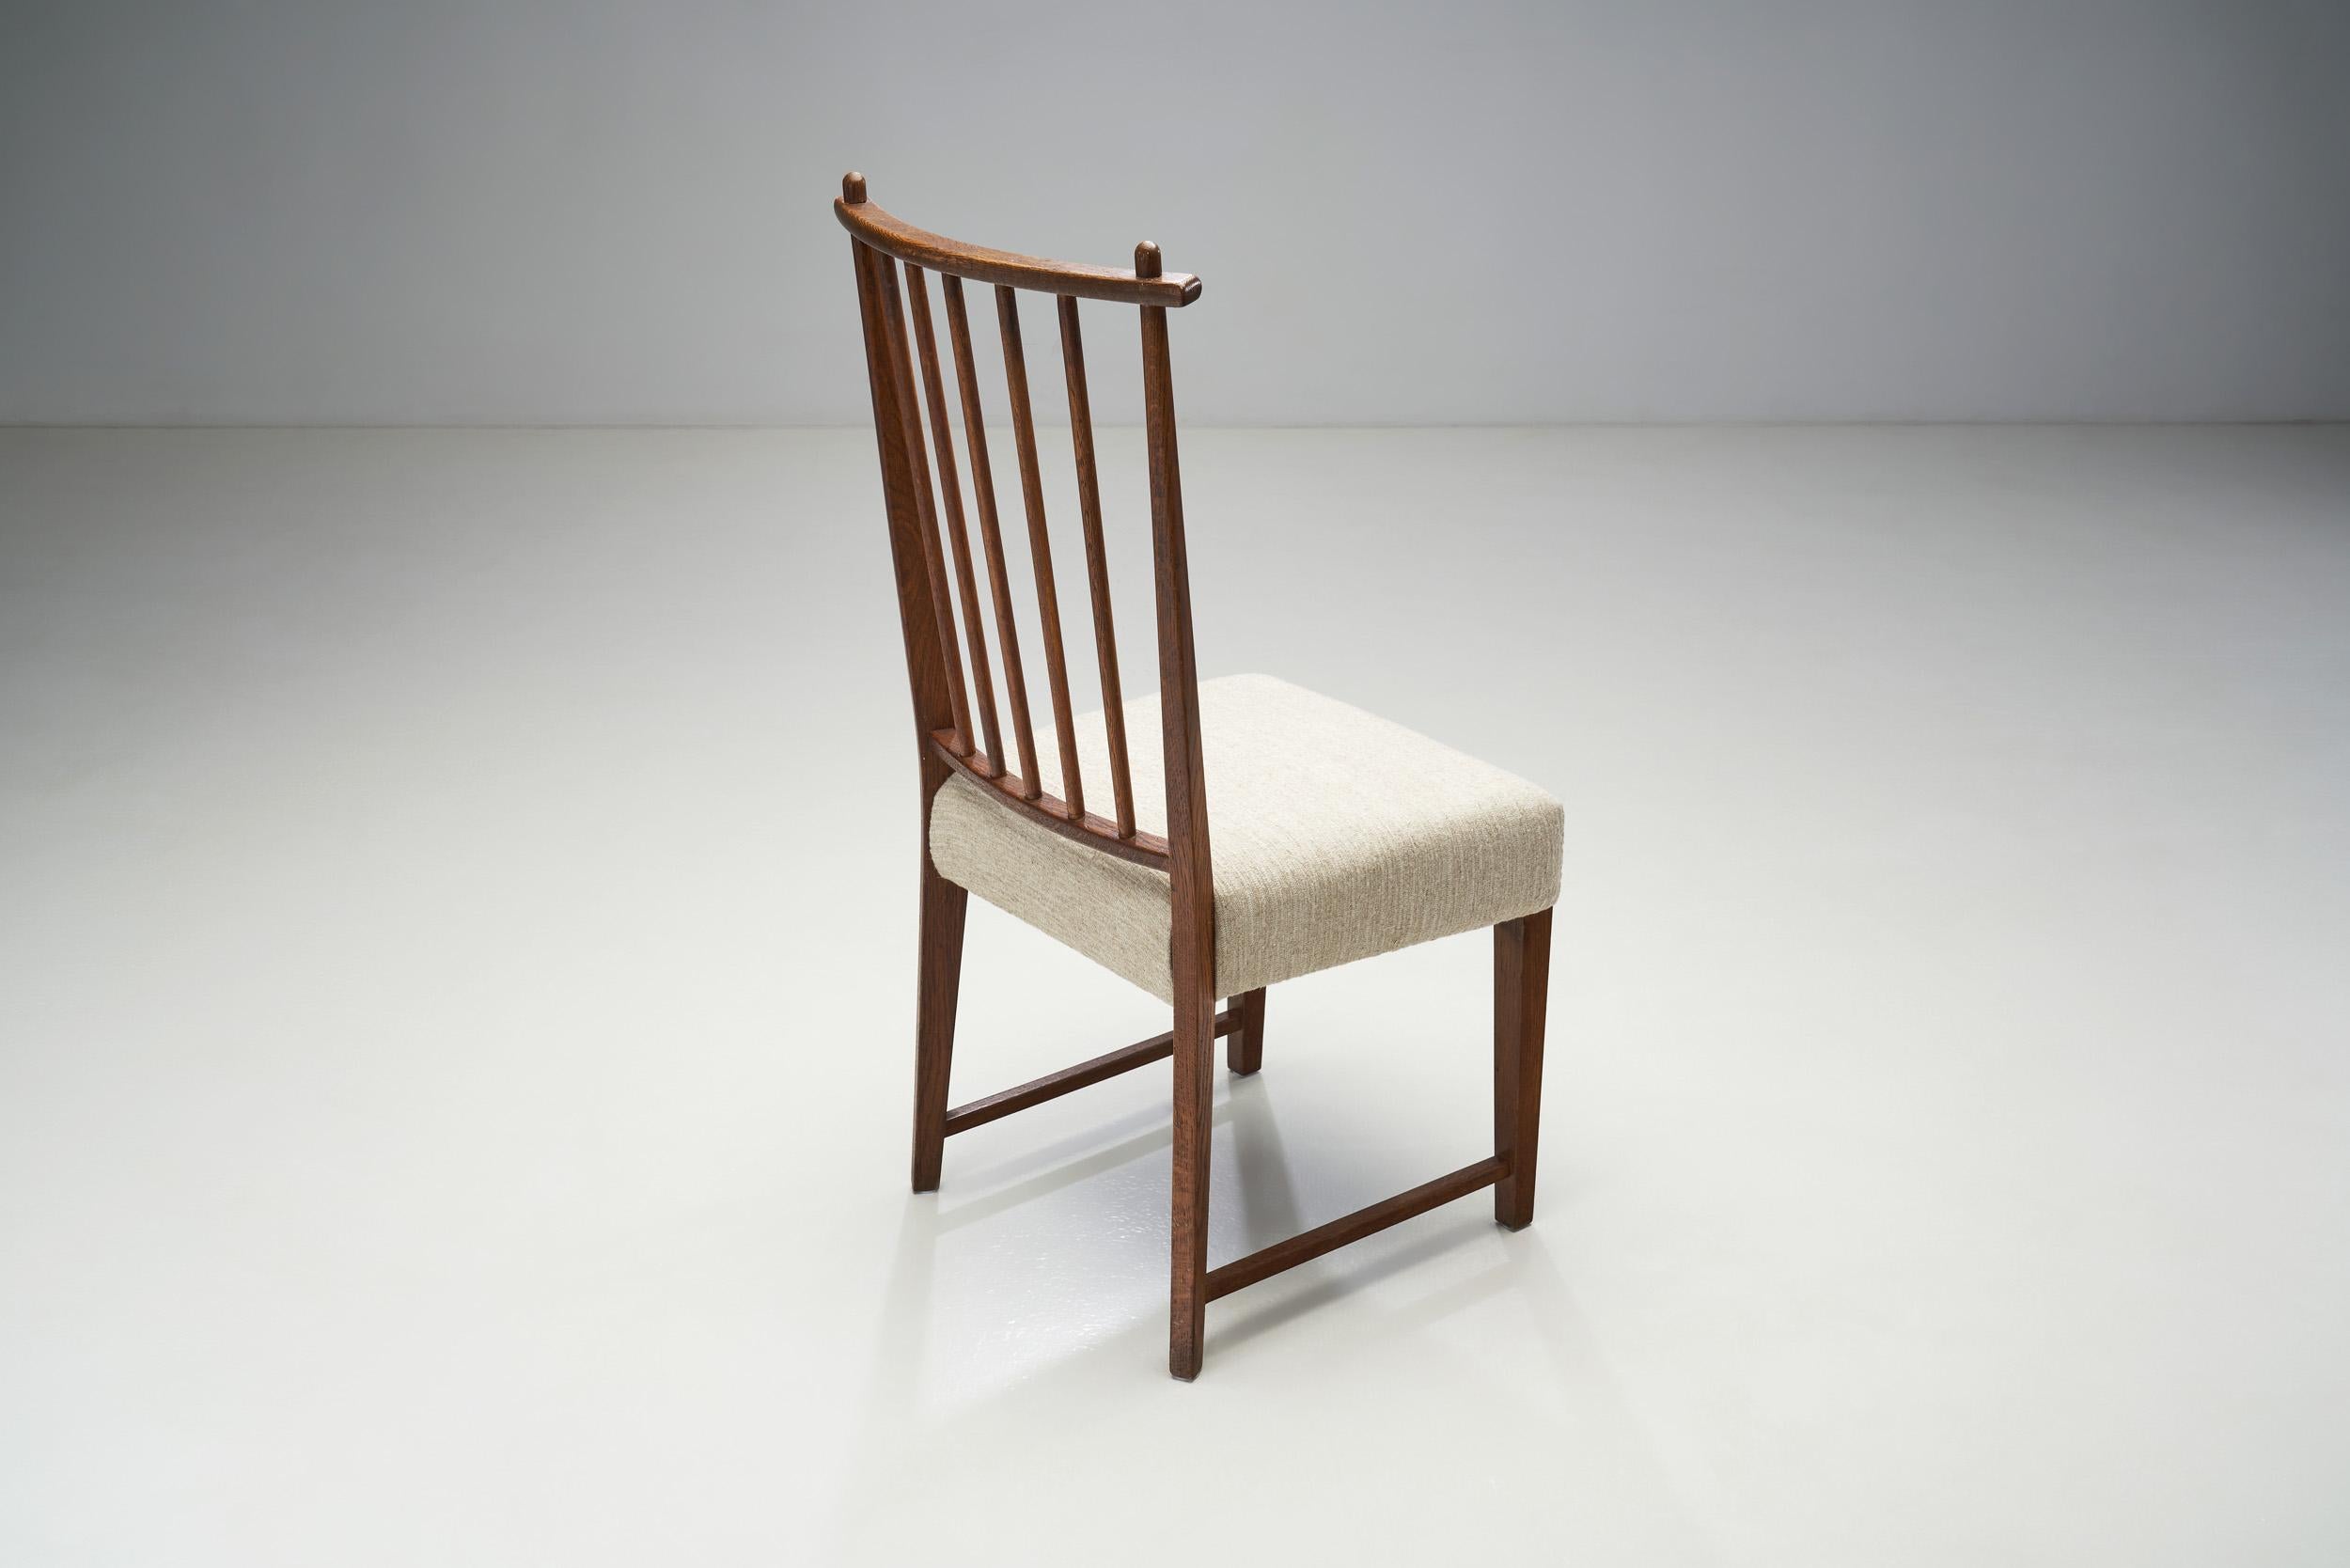 Bas van Pelt Set of Six Dining Chairs for My Home, The Netherlands, 1930s For Sale 1